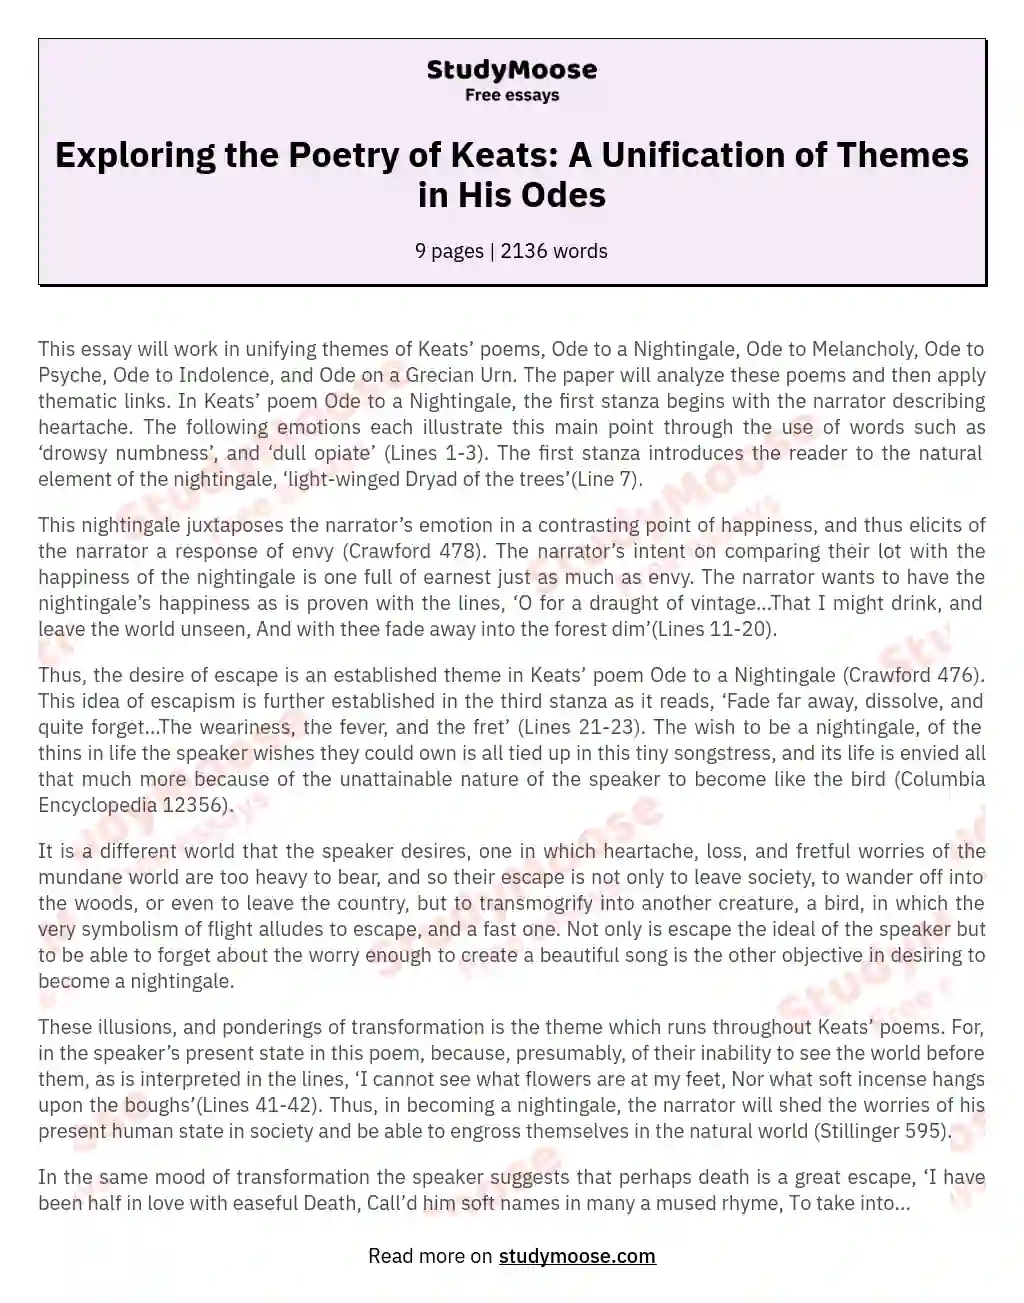 Exploring the Poetry of Keats: A Unification of Themes in His Odes essay